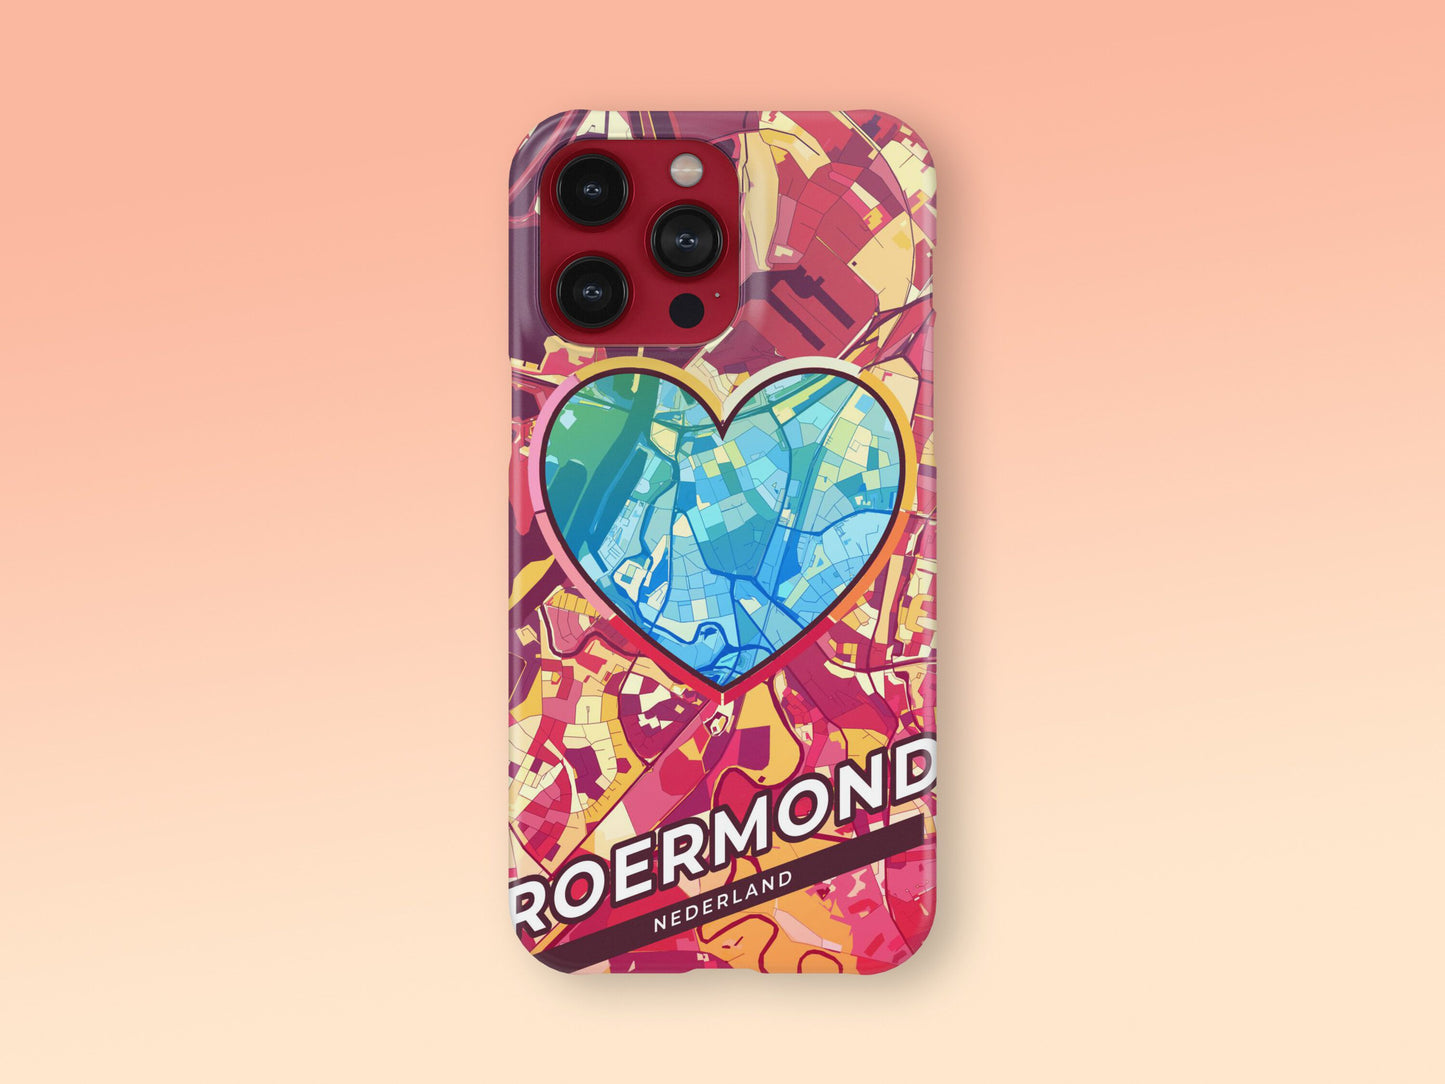 Roermond Netherlands slim phone case with colorful icon. Birthday, wedding or housewarming gift. Couple match cases. 2